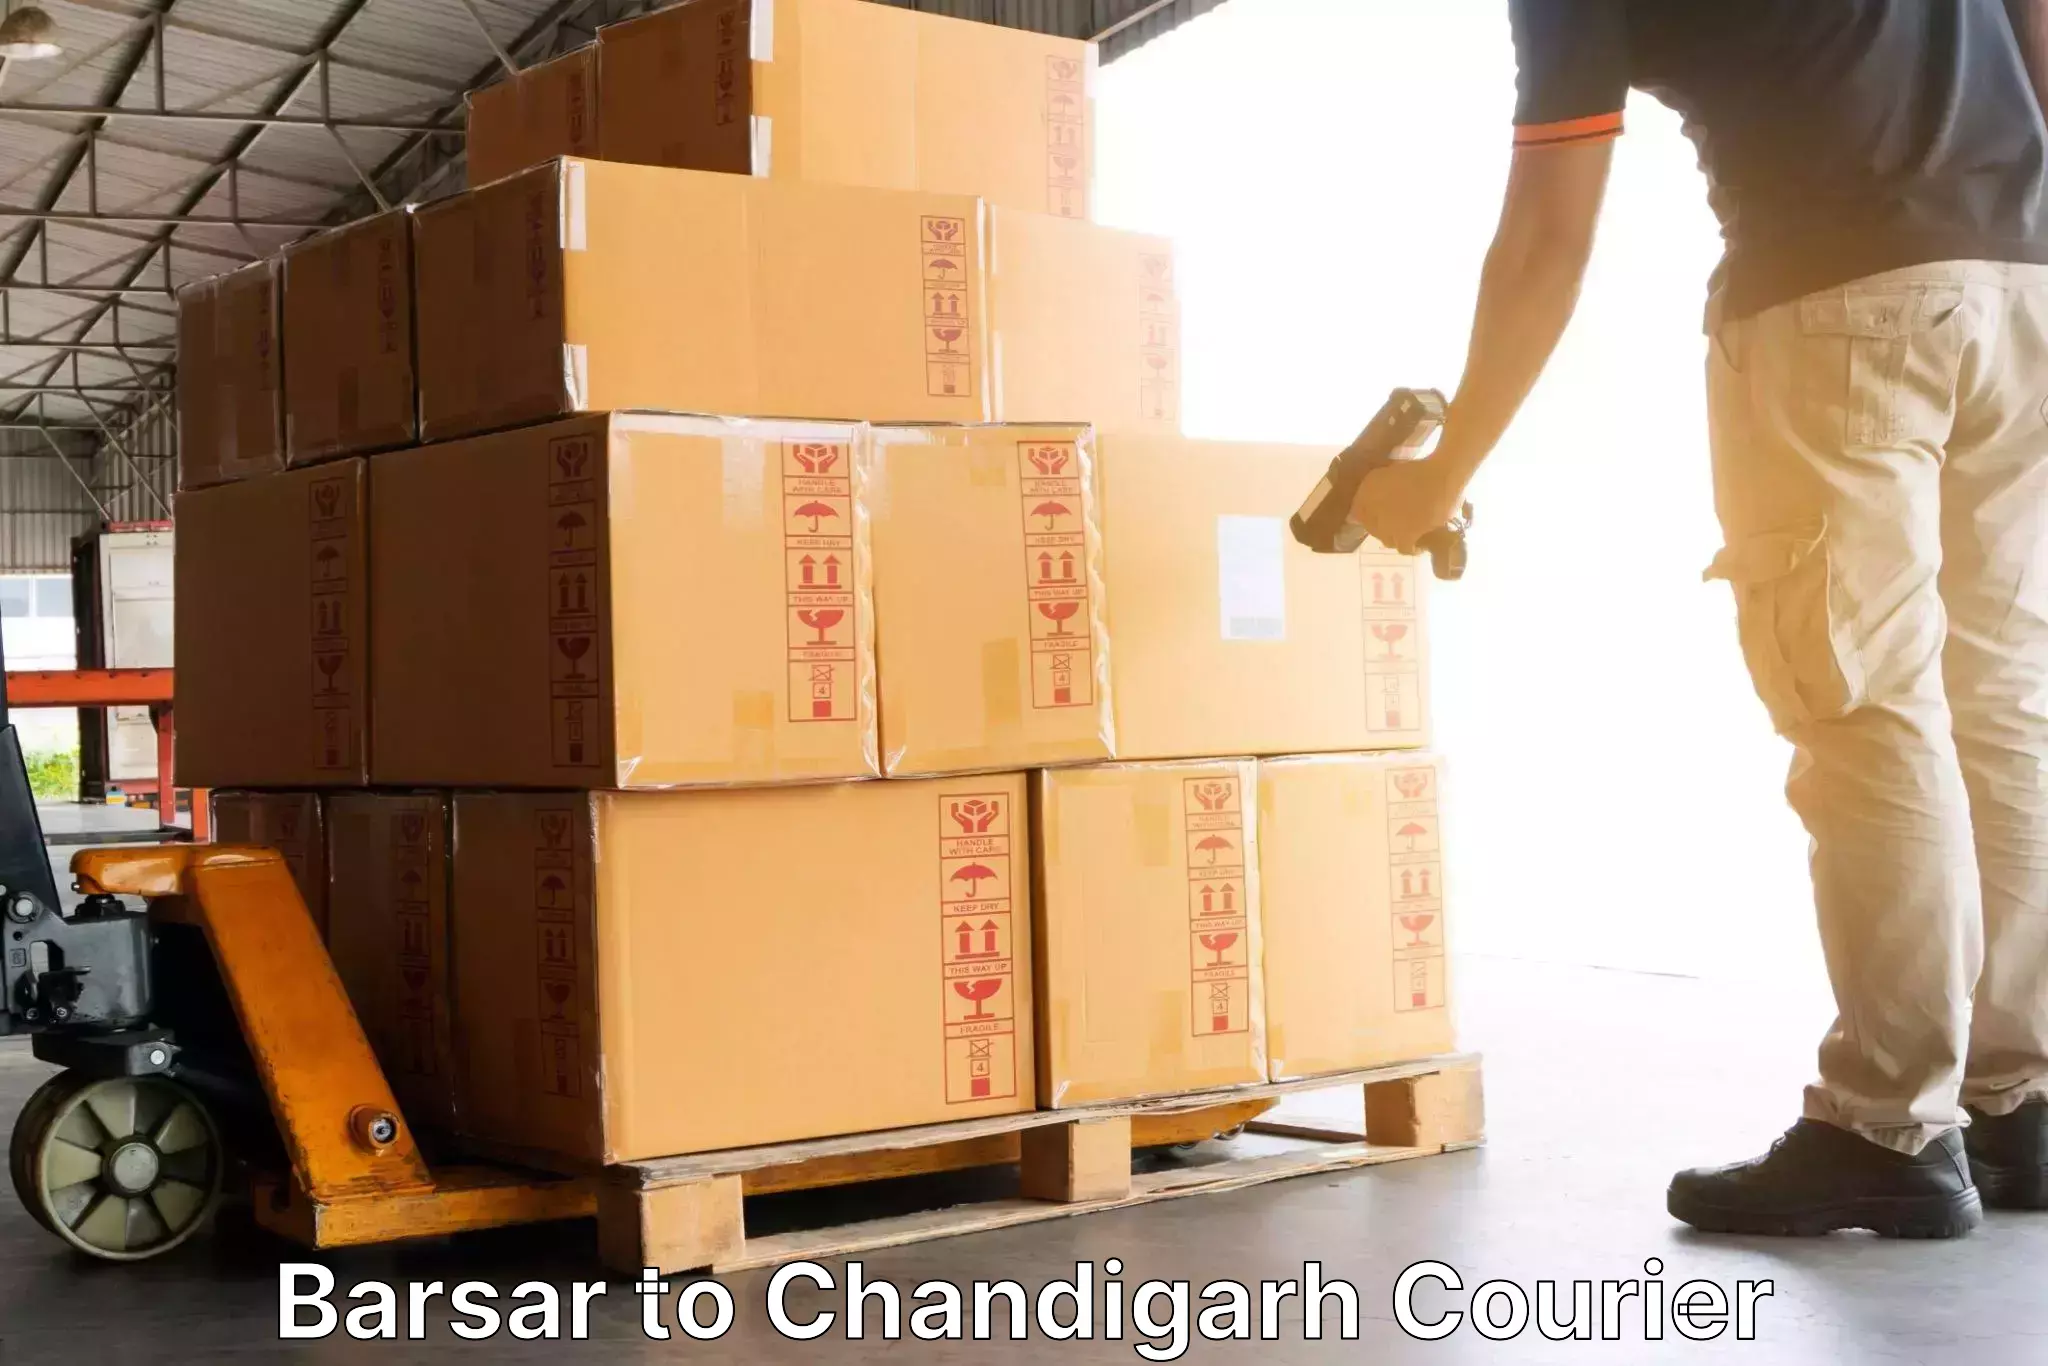 Courier service booking Barsar to Chandigarh